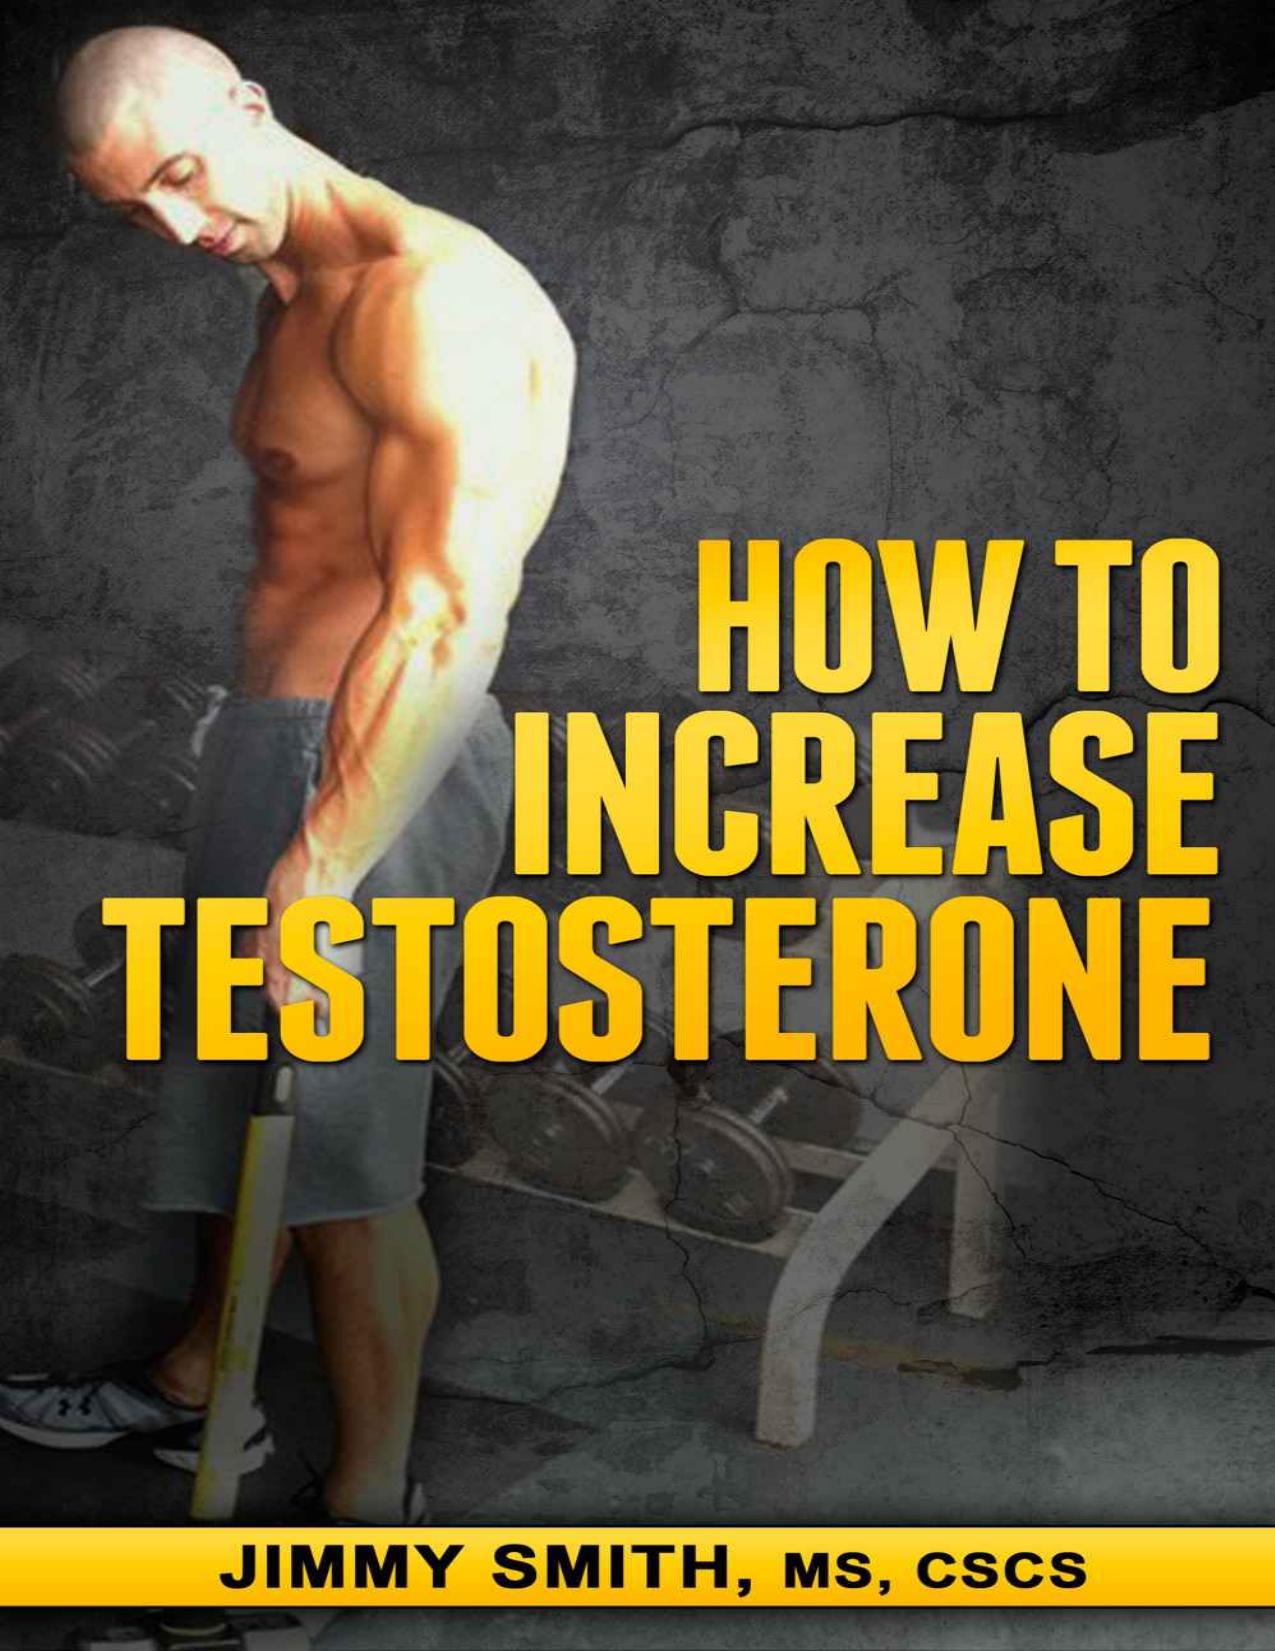 How To Increase Your Testosterone by Jimmy Smith